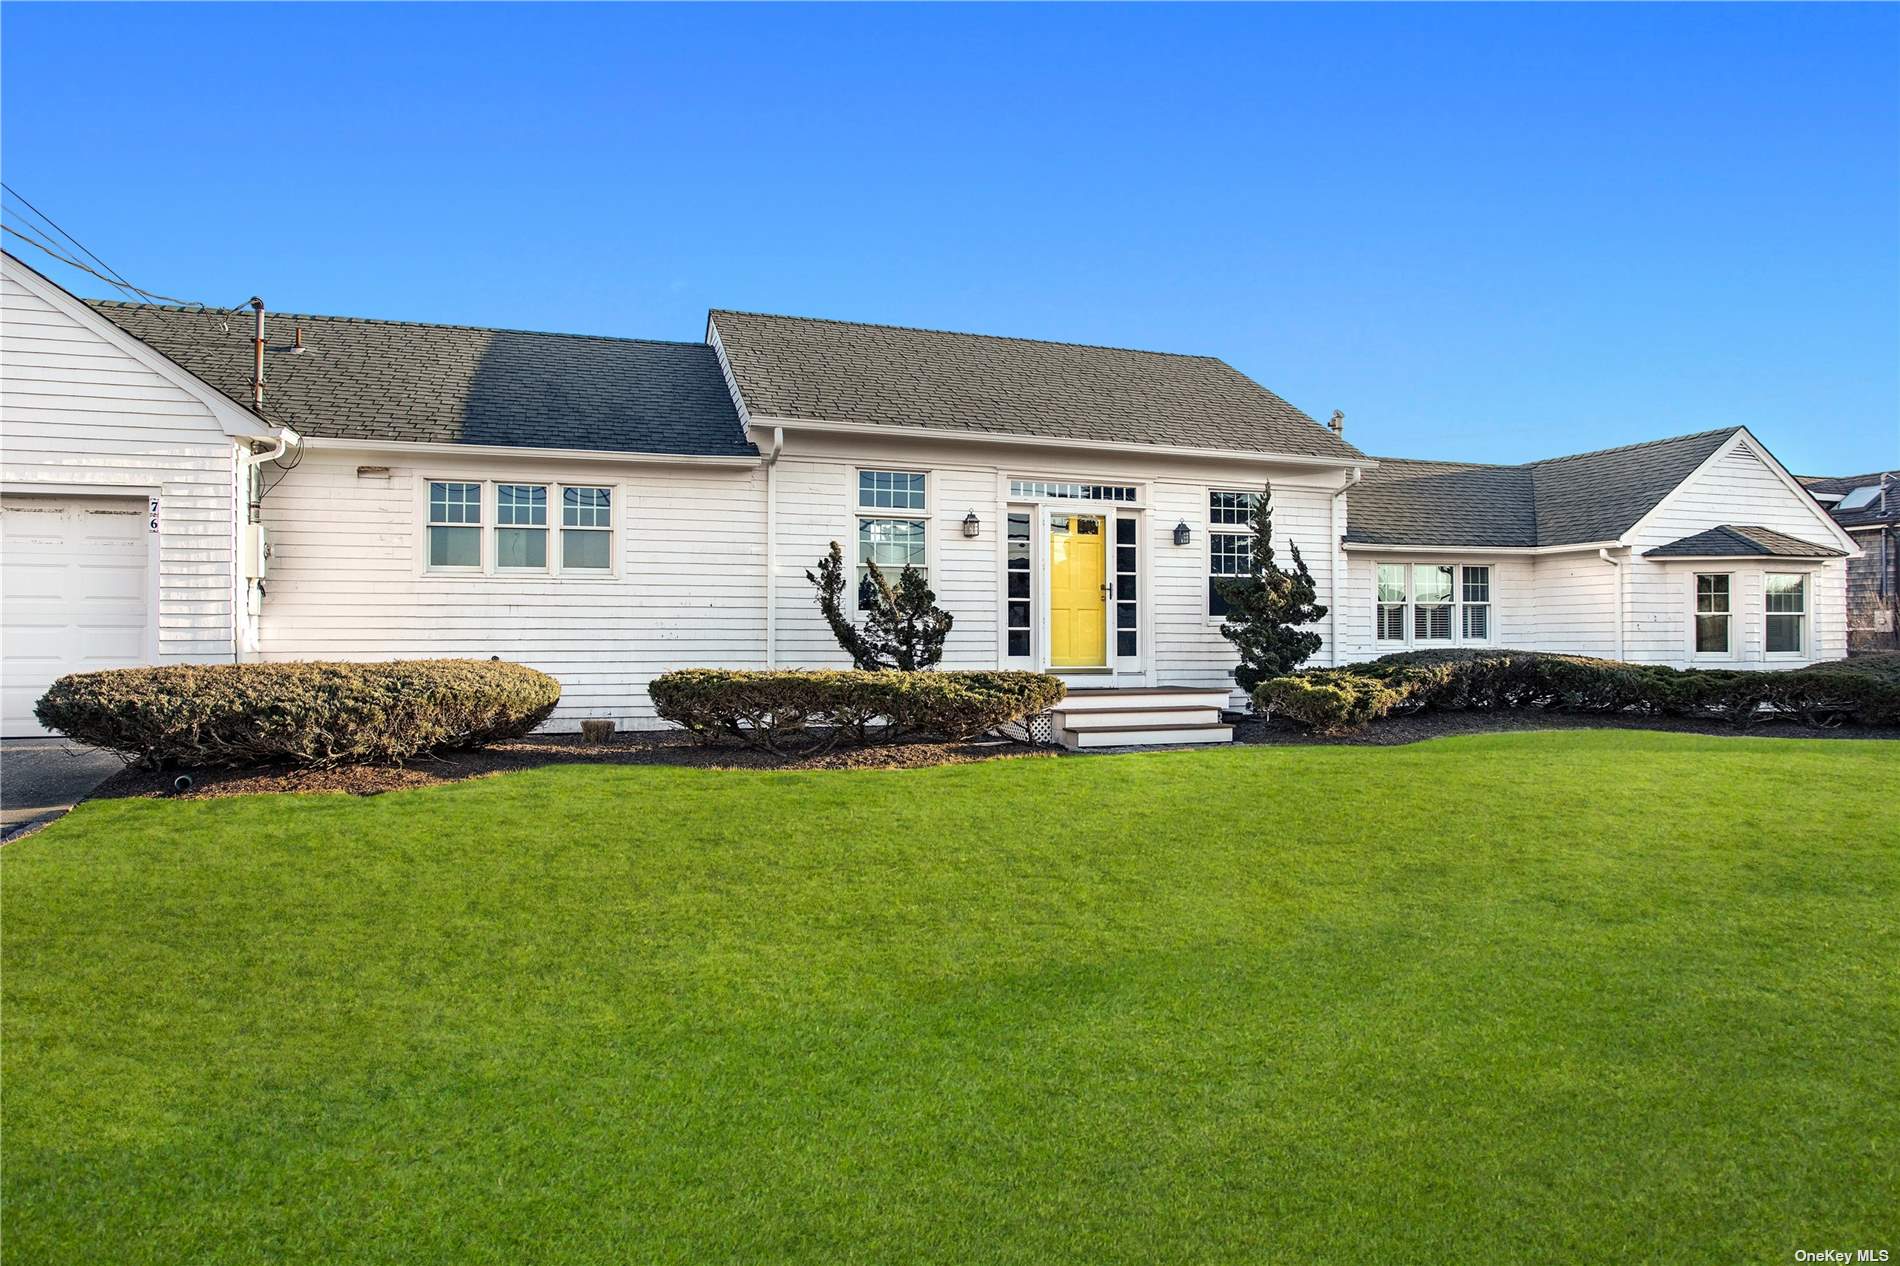 House in Quogue - Dune  Suffolk, NY 11959